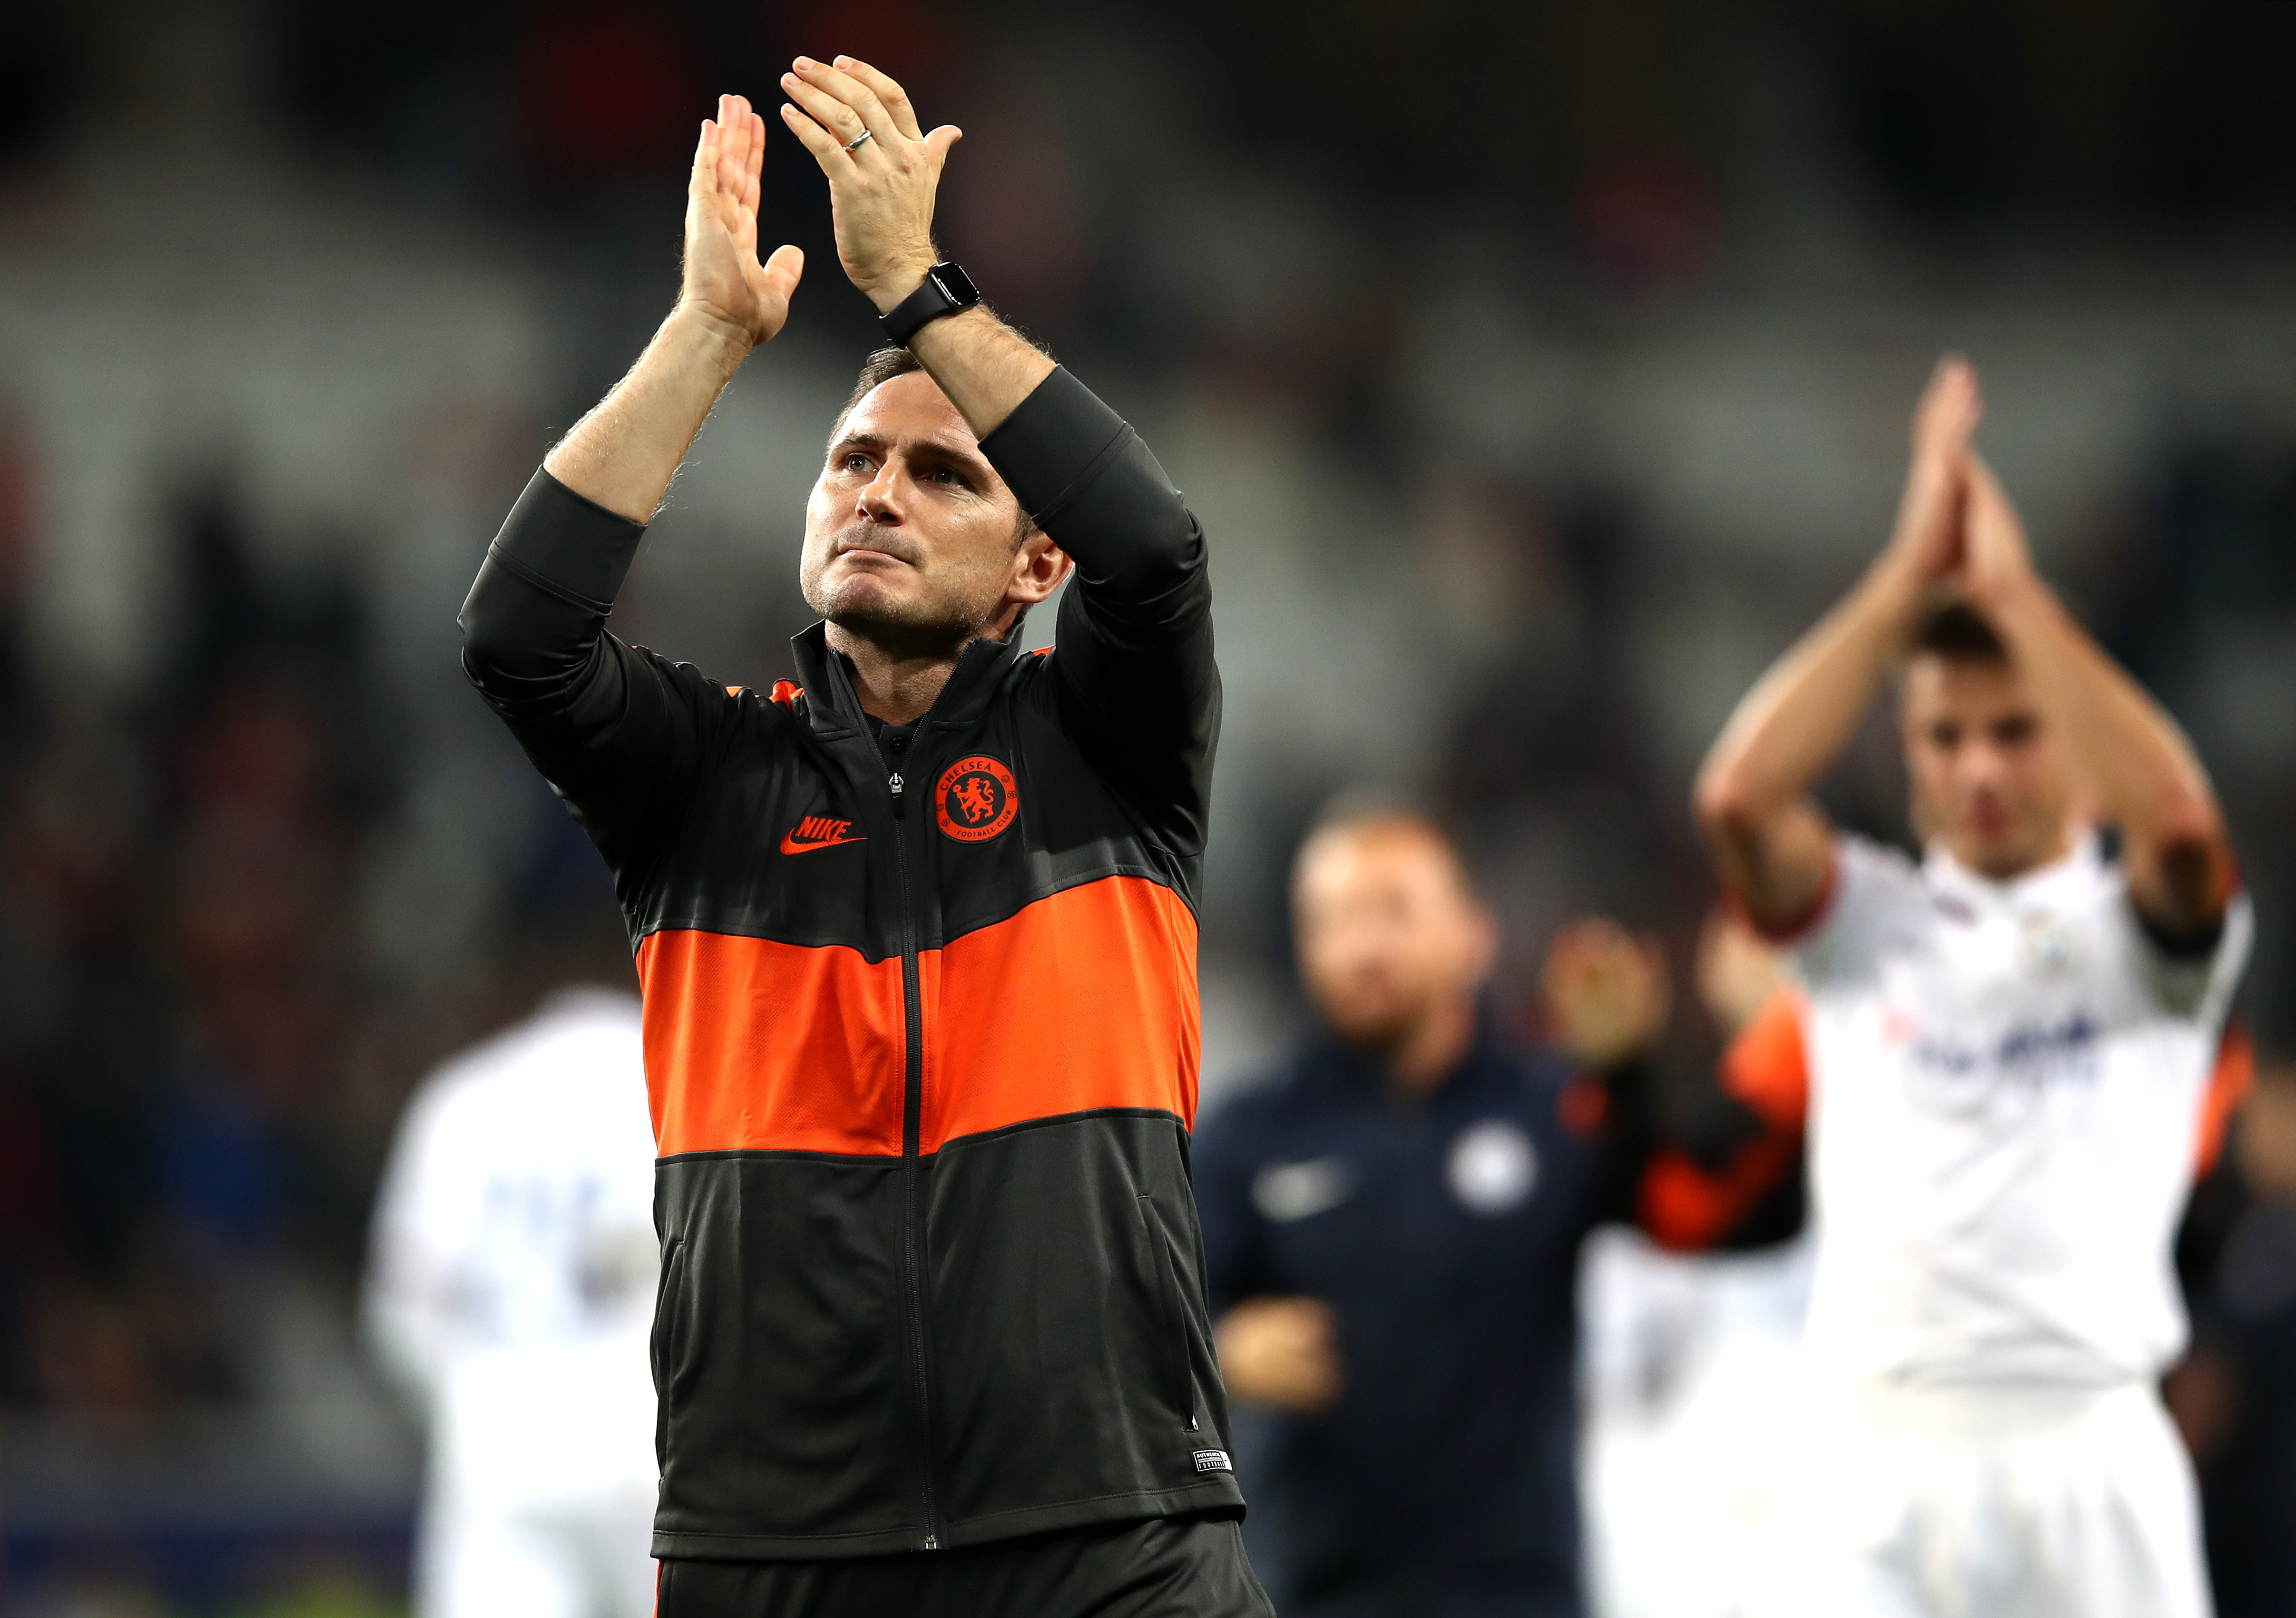 LILLE, FRANCE - OCTOBER 02: Frank Lampard, Manager of Chelsea celebrates during the UEFA Champions League group H match between Lille OSC and Chelsea FC at Stade Pierre Mauroy on October 02, 2019 in Lille, France. (Photo by Bryn Lennon/Getty Images)